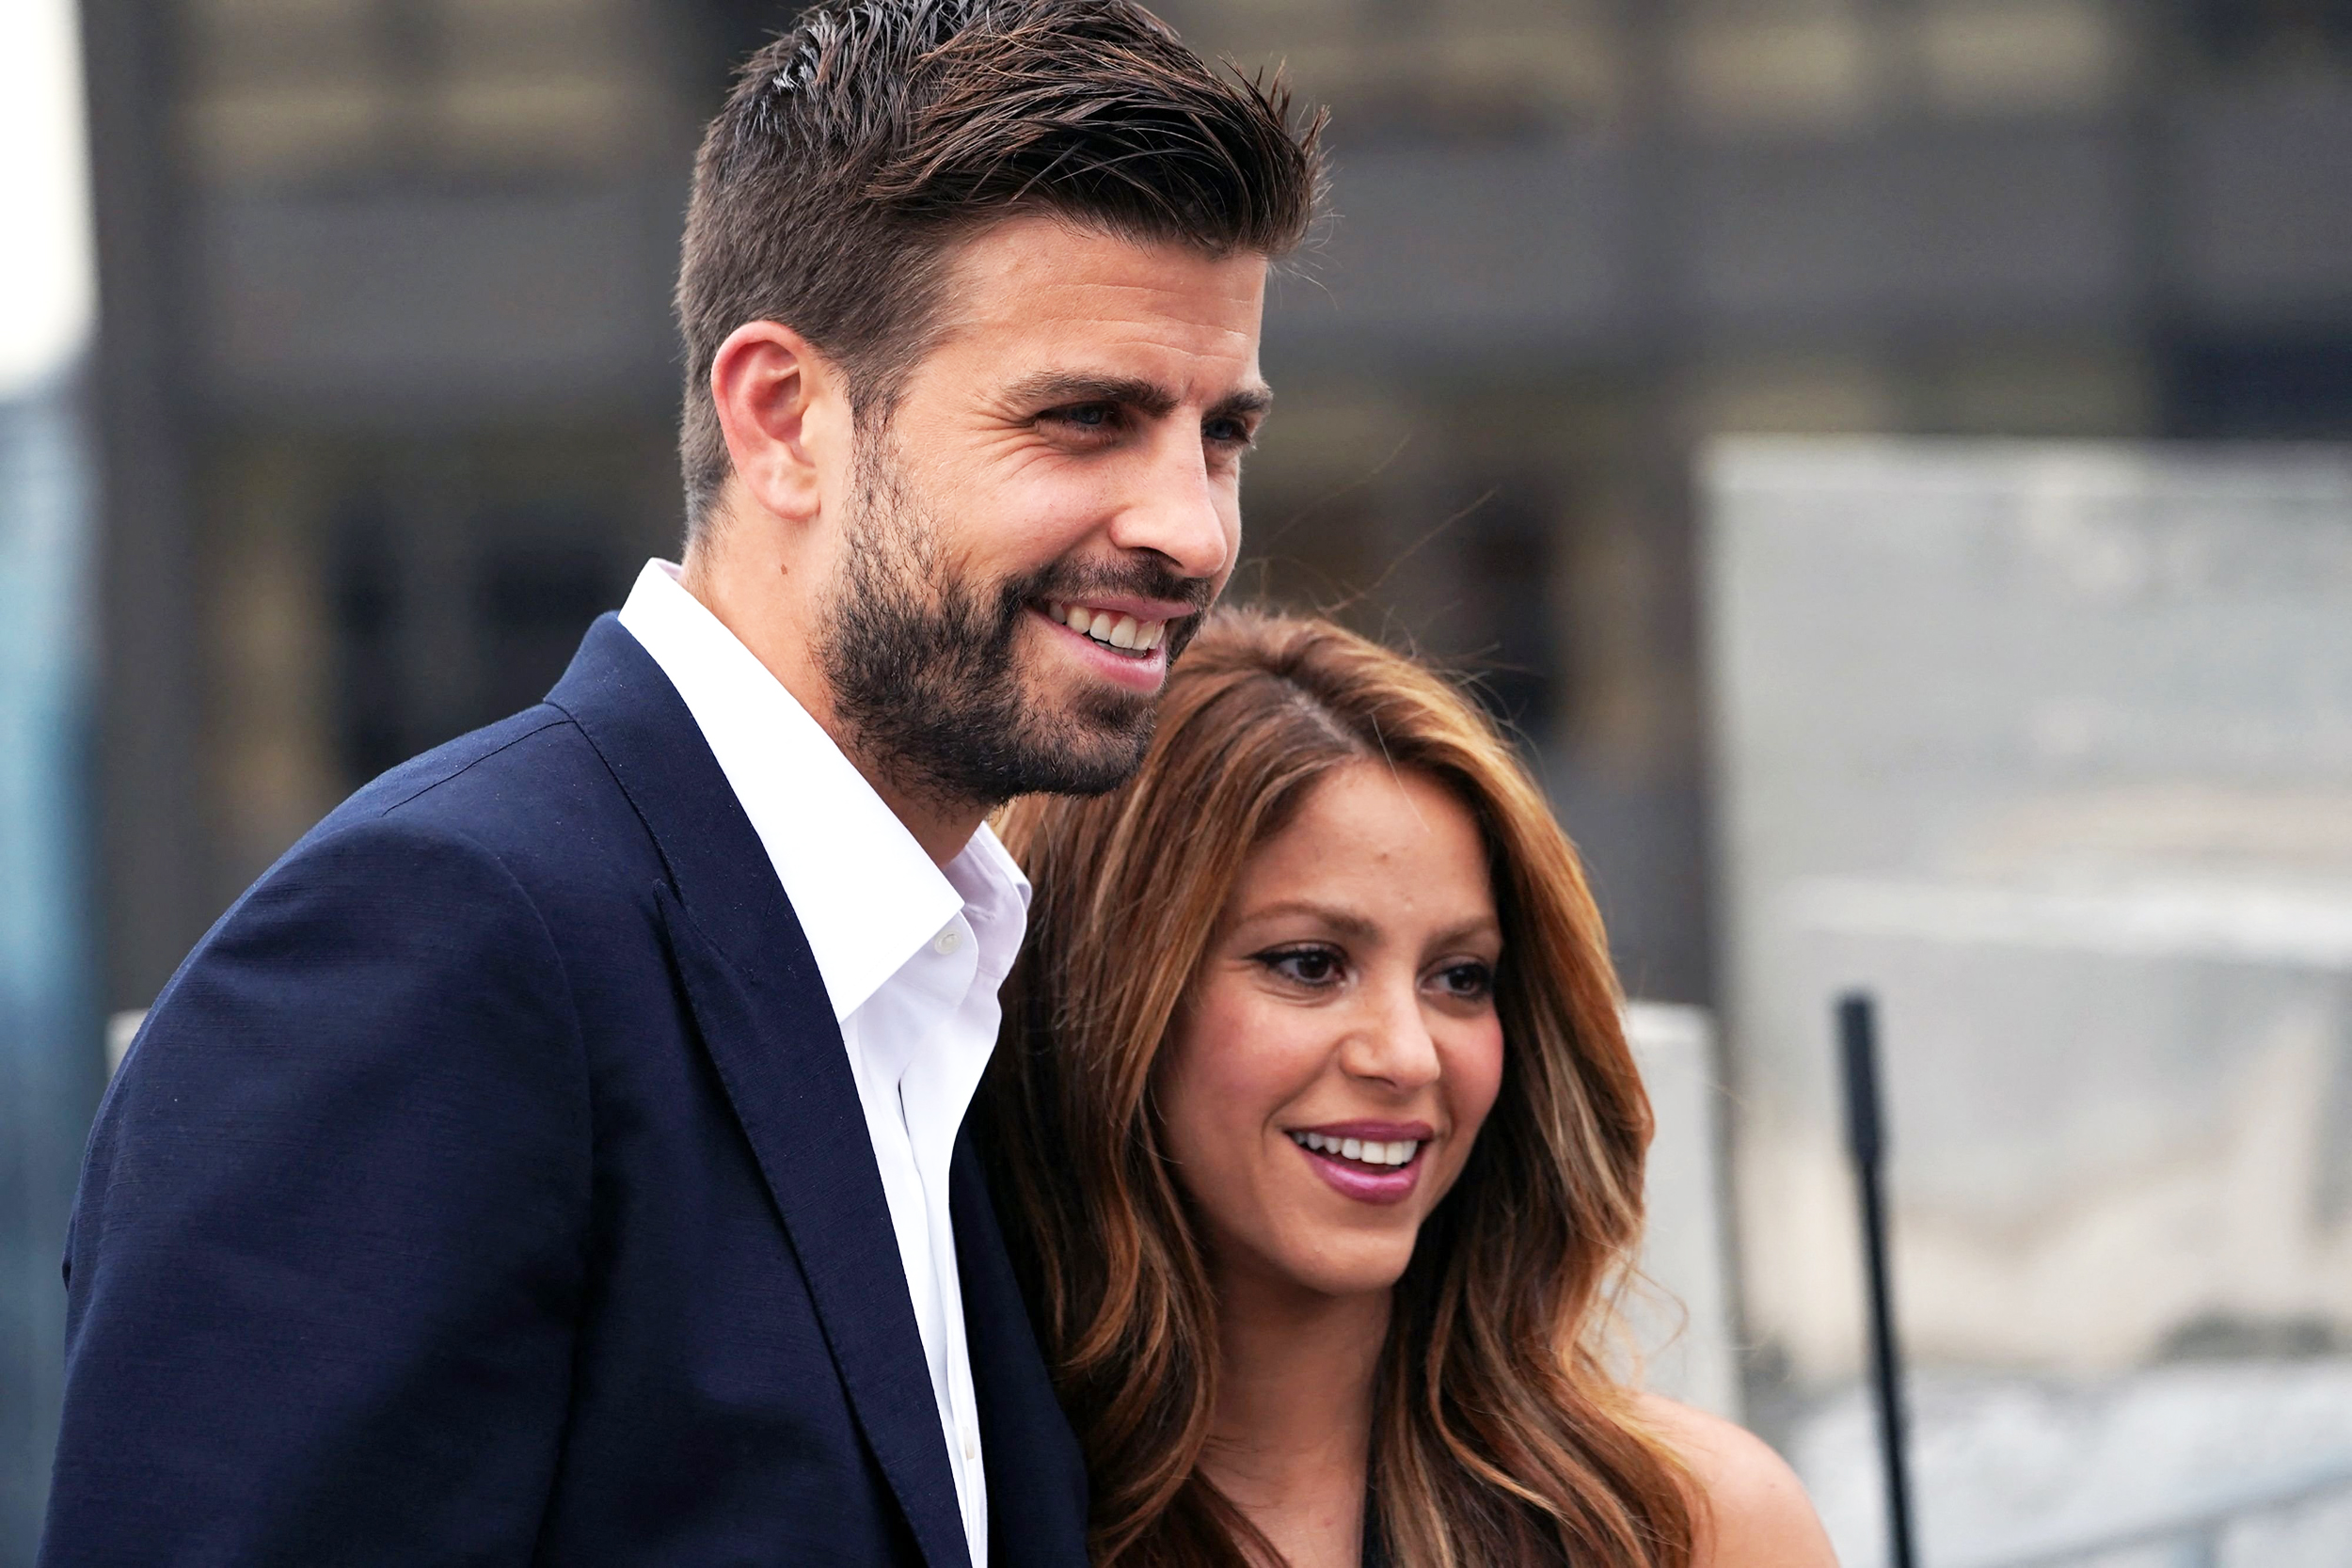 Shakira and Gerard Pique clicked together